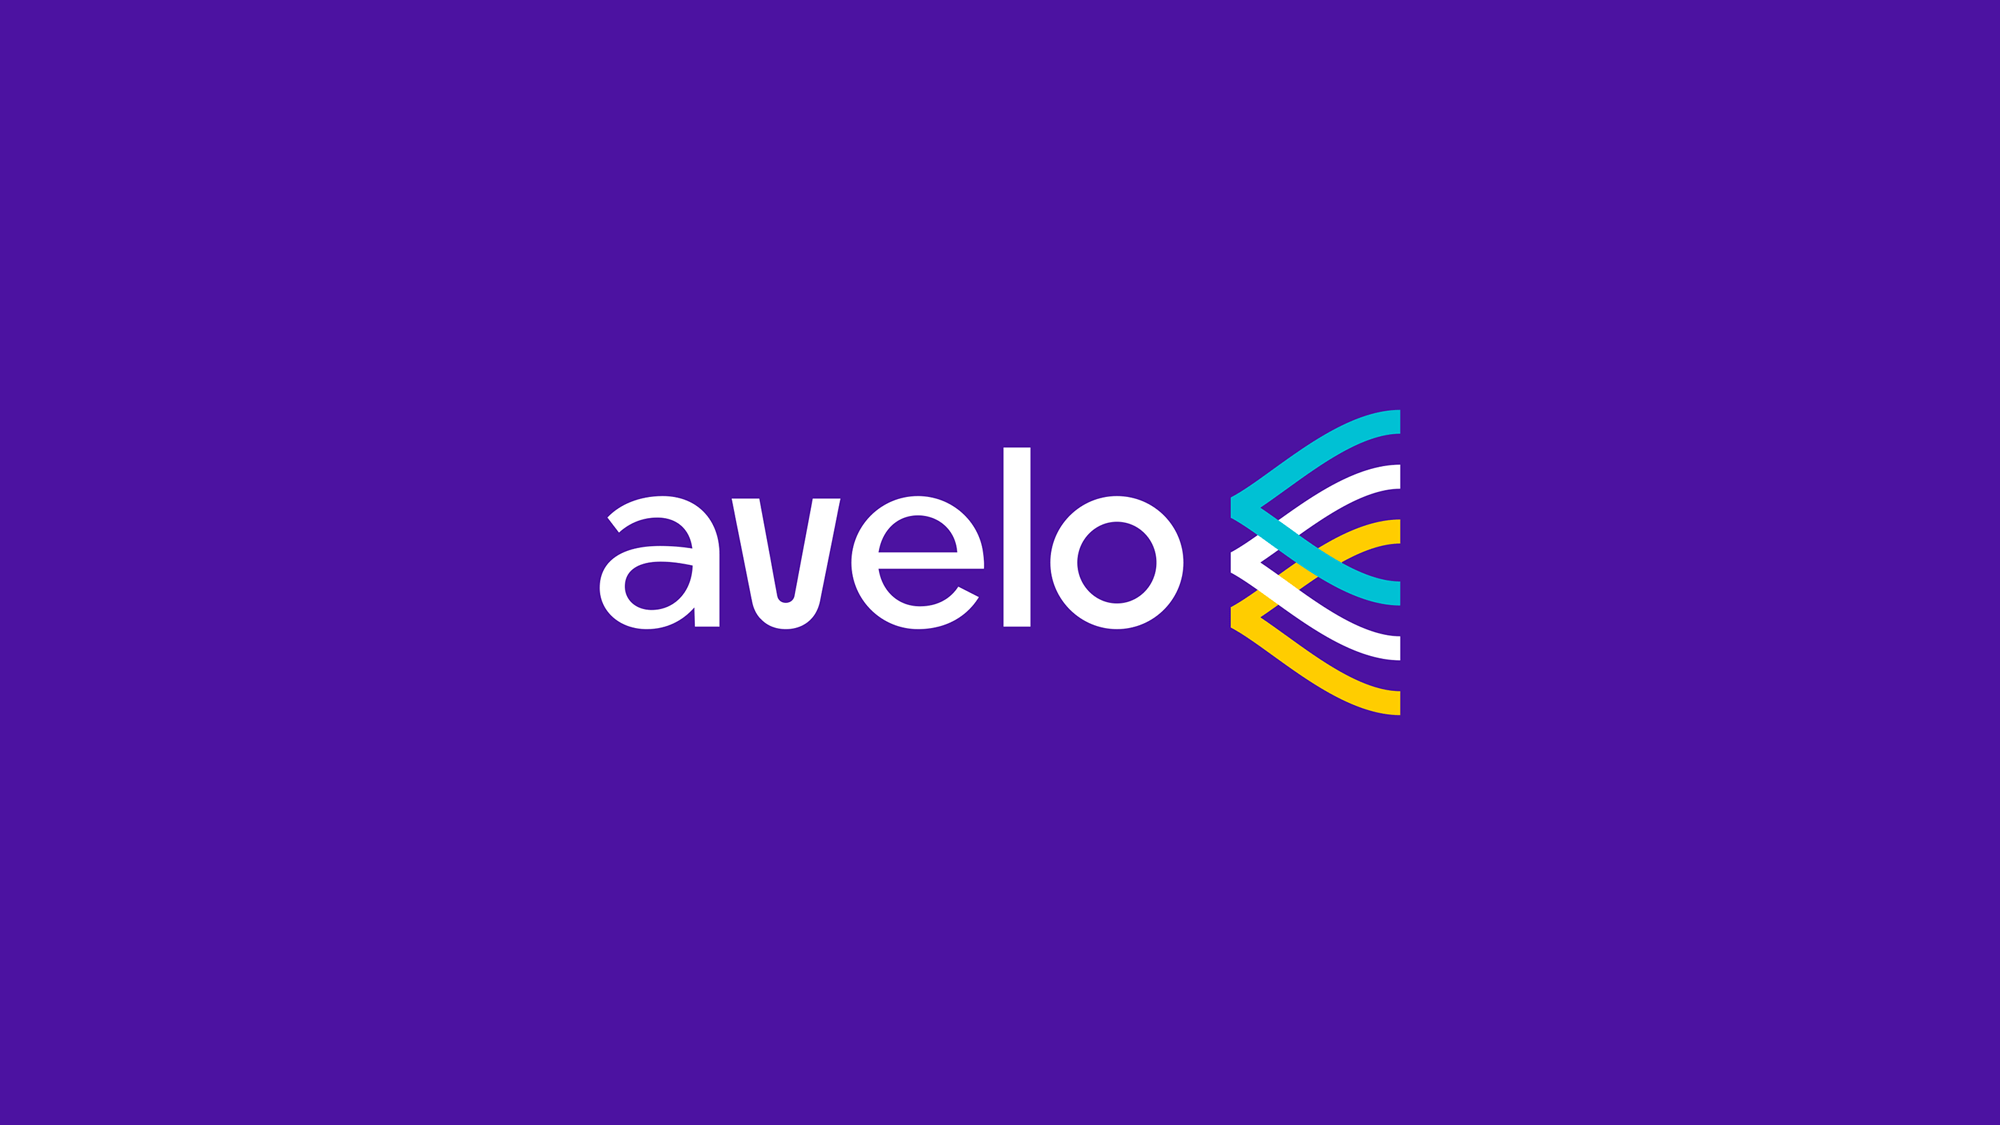 Brand New: New Logo, Identity, and Livery for Avelo Airlines by Kim Berlin